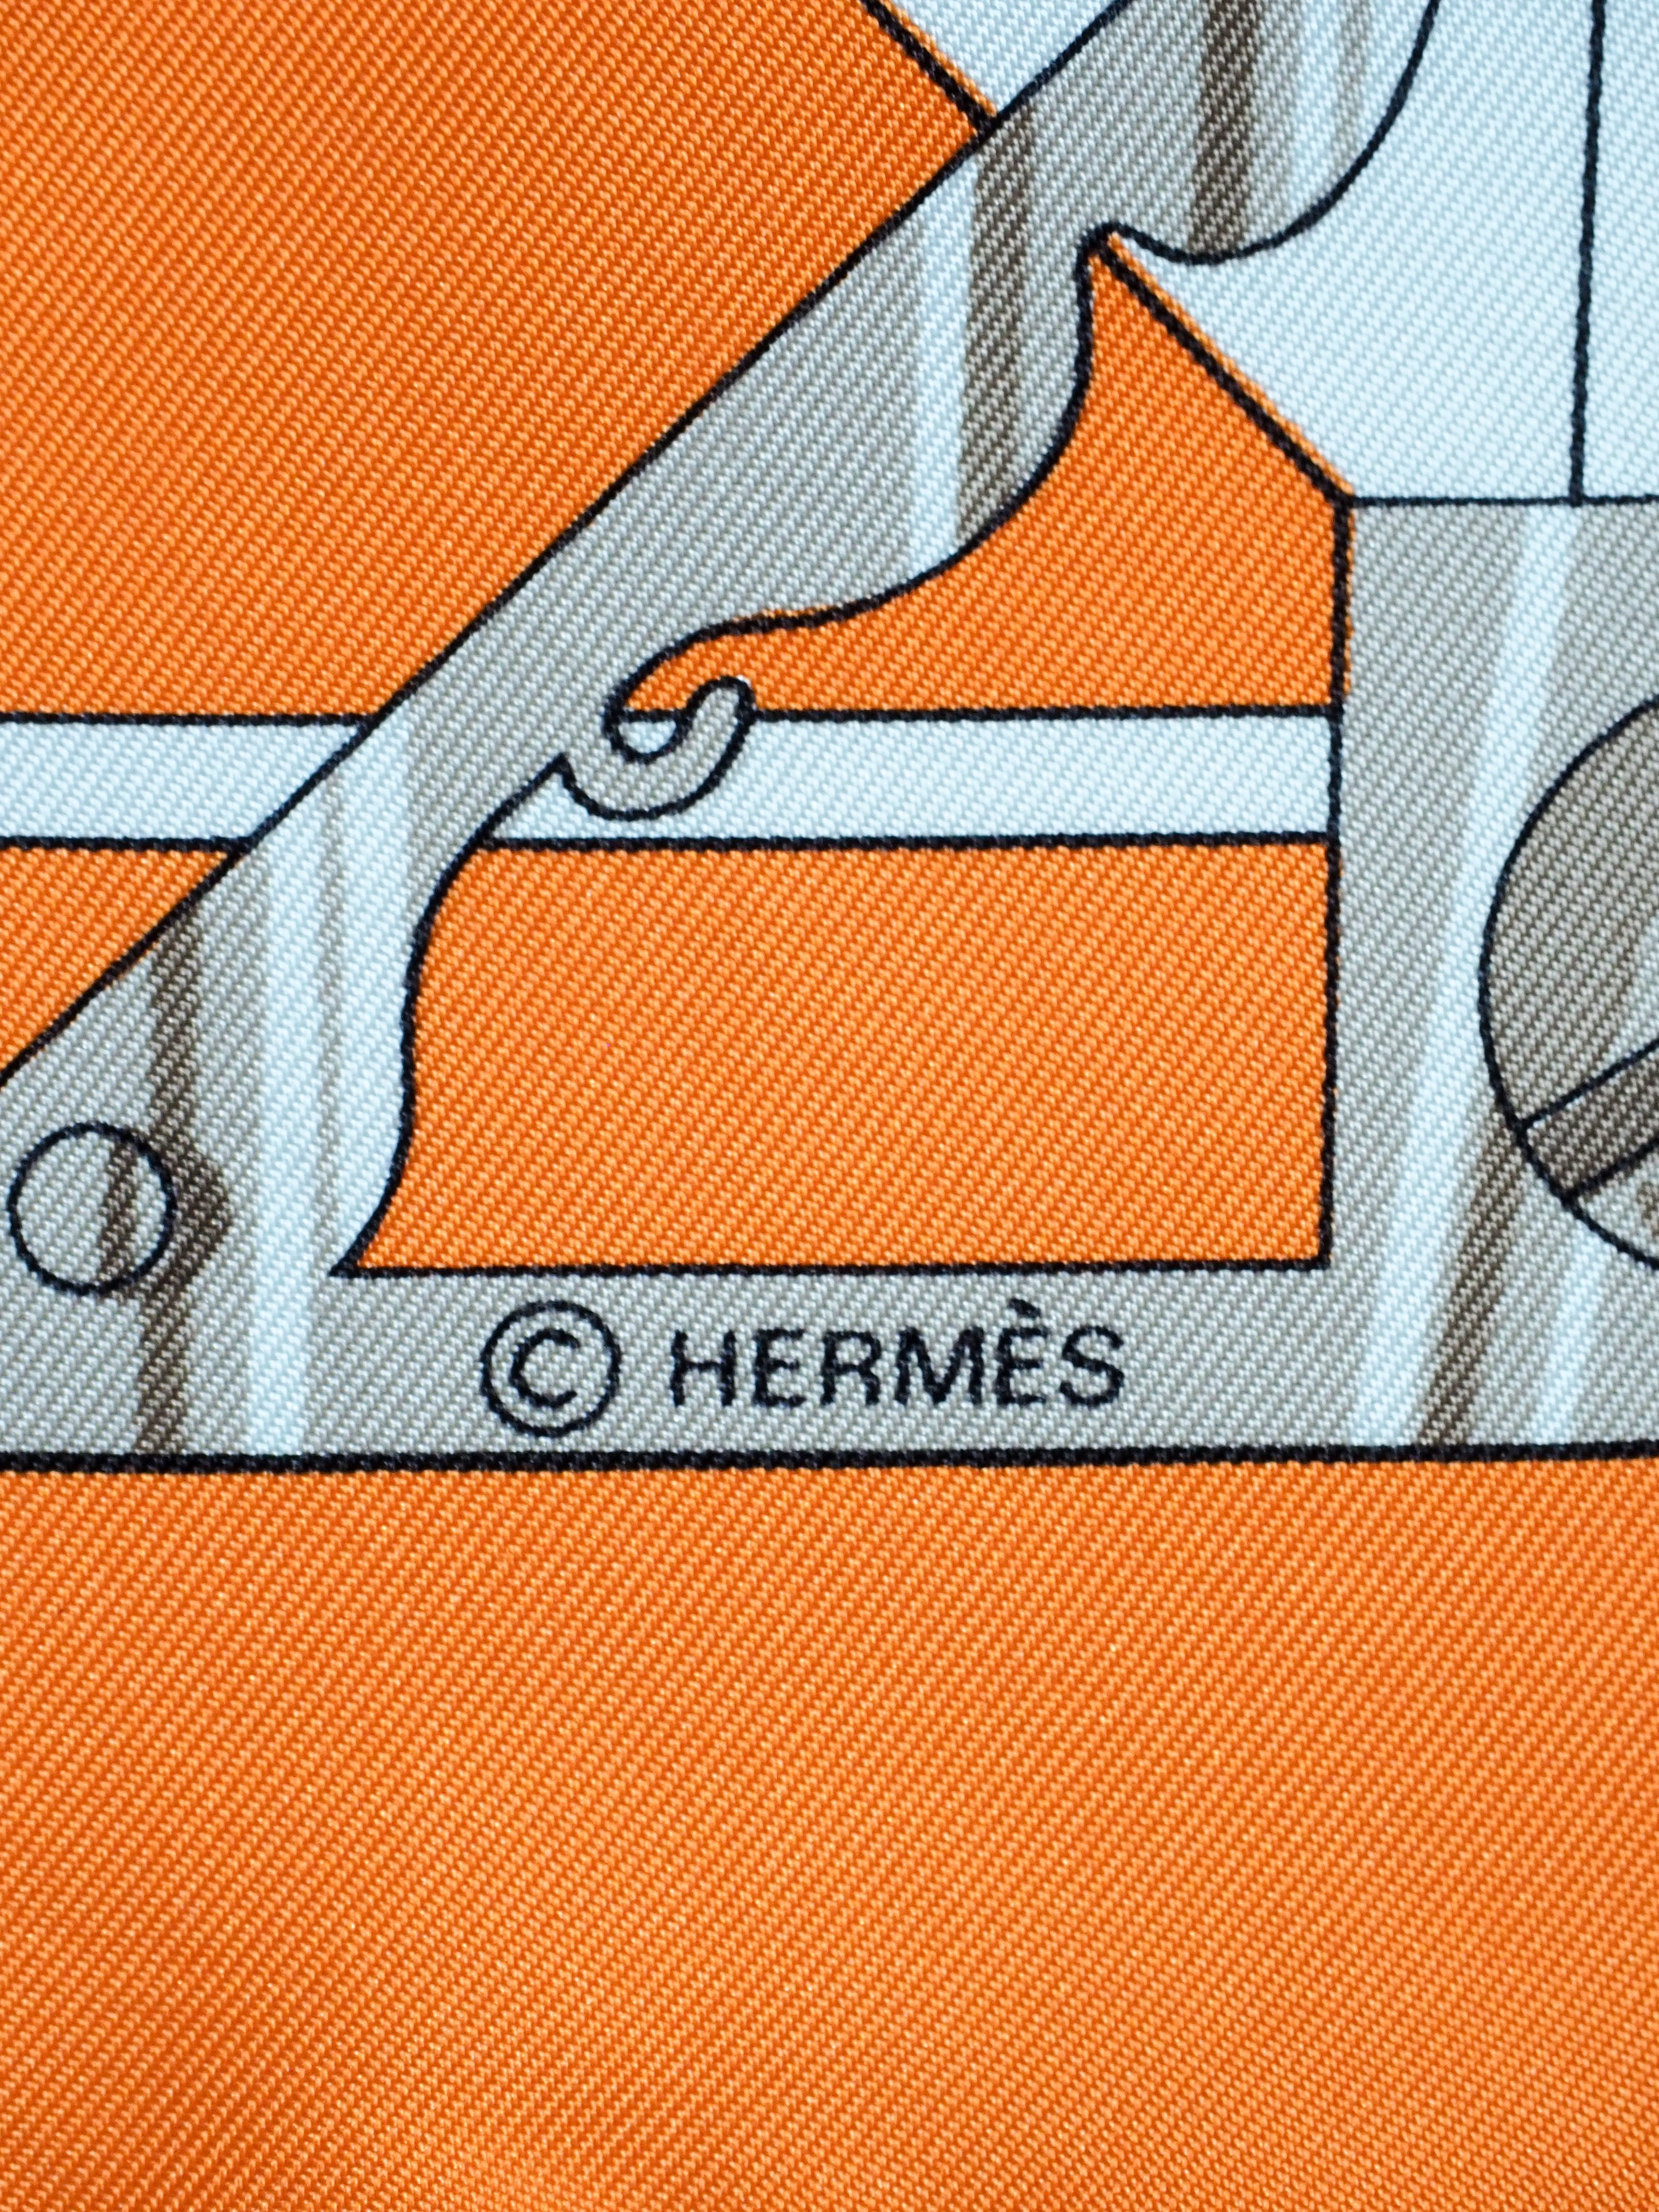 Hermès Silk Square Scarf - Carre 90 Sextants by Loic Dubigeon